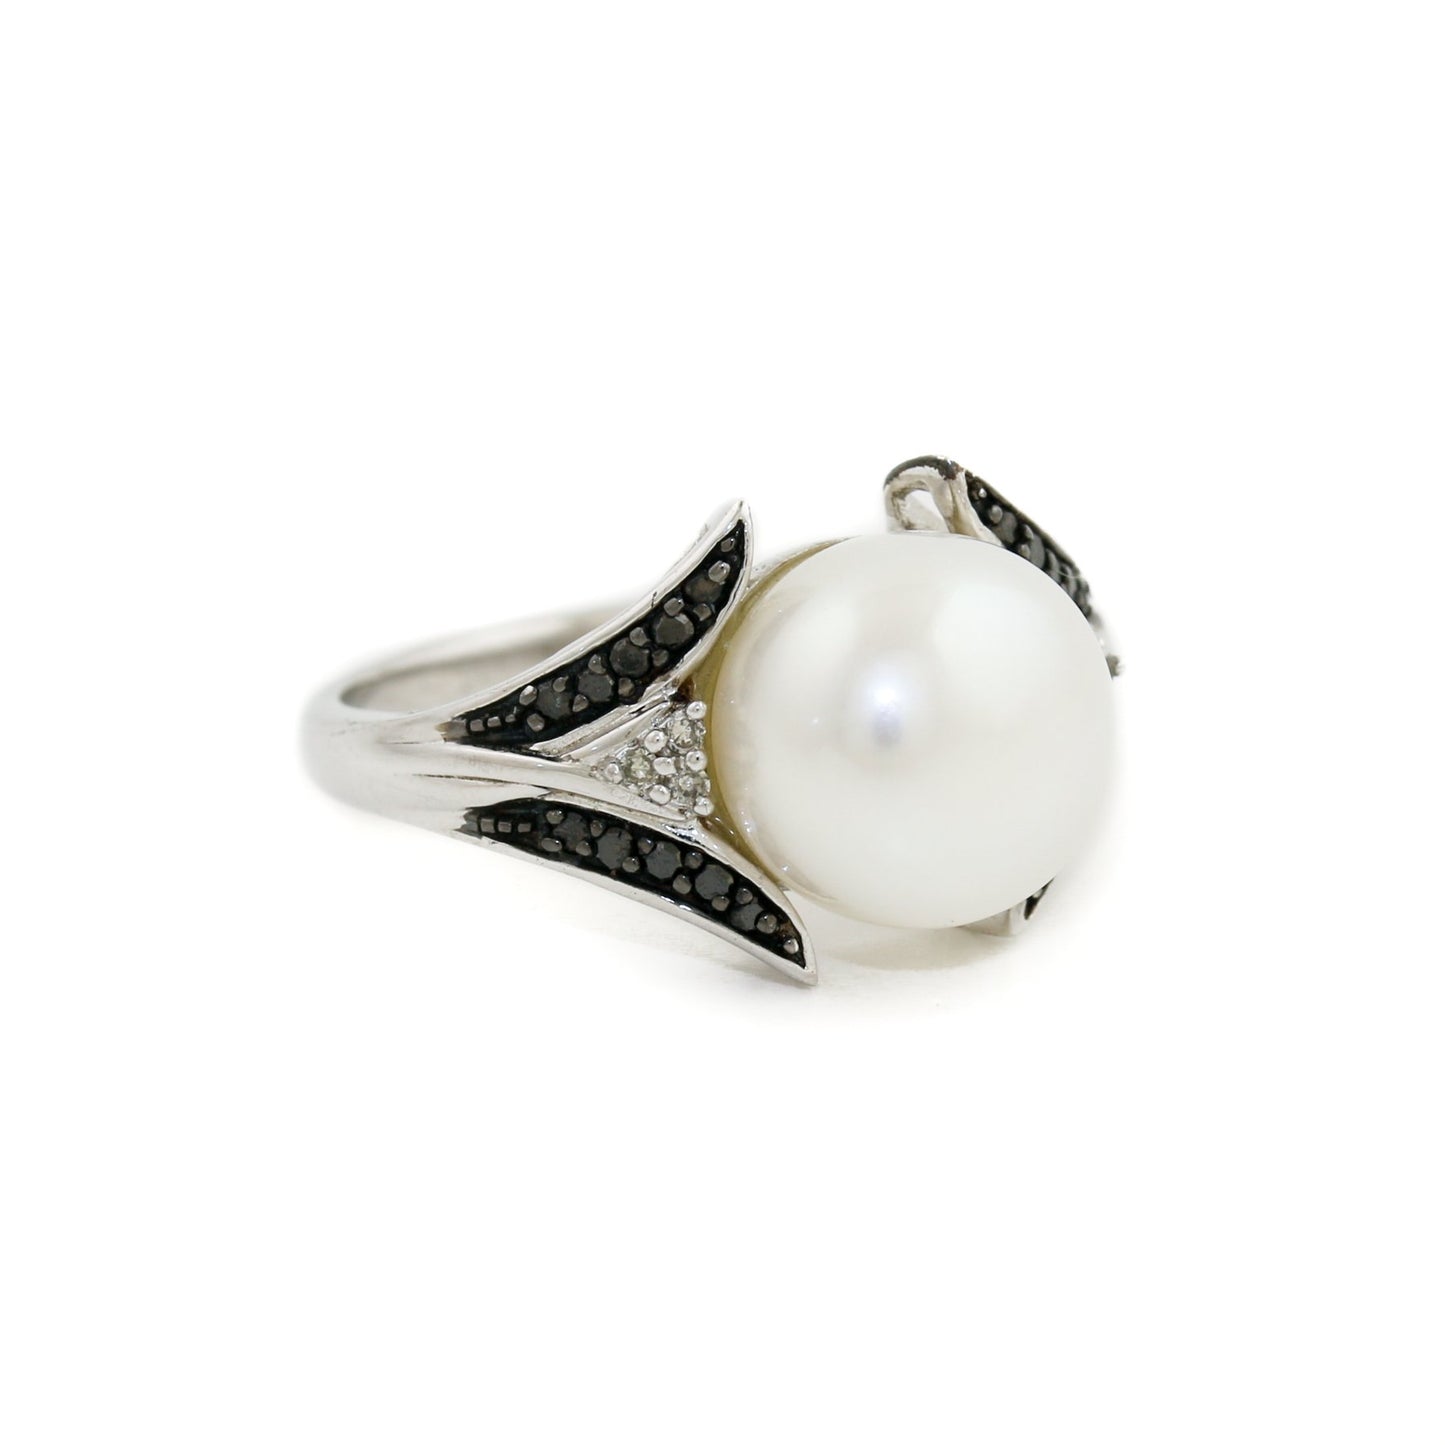 10k White Gold x Accented "Alwand Vahan" Mixed Diamond & Sea Pearl Ring - Kingdom Jewelry